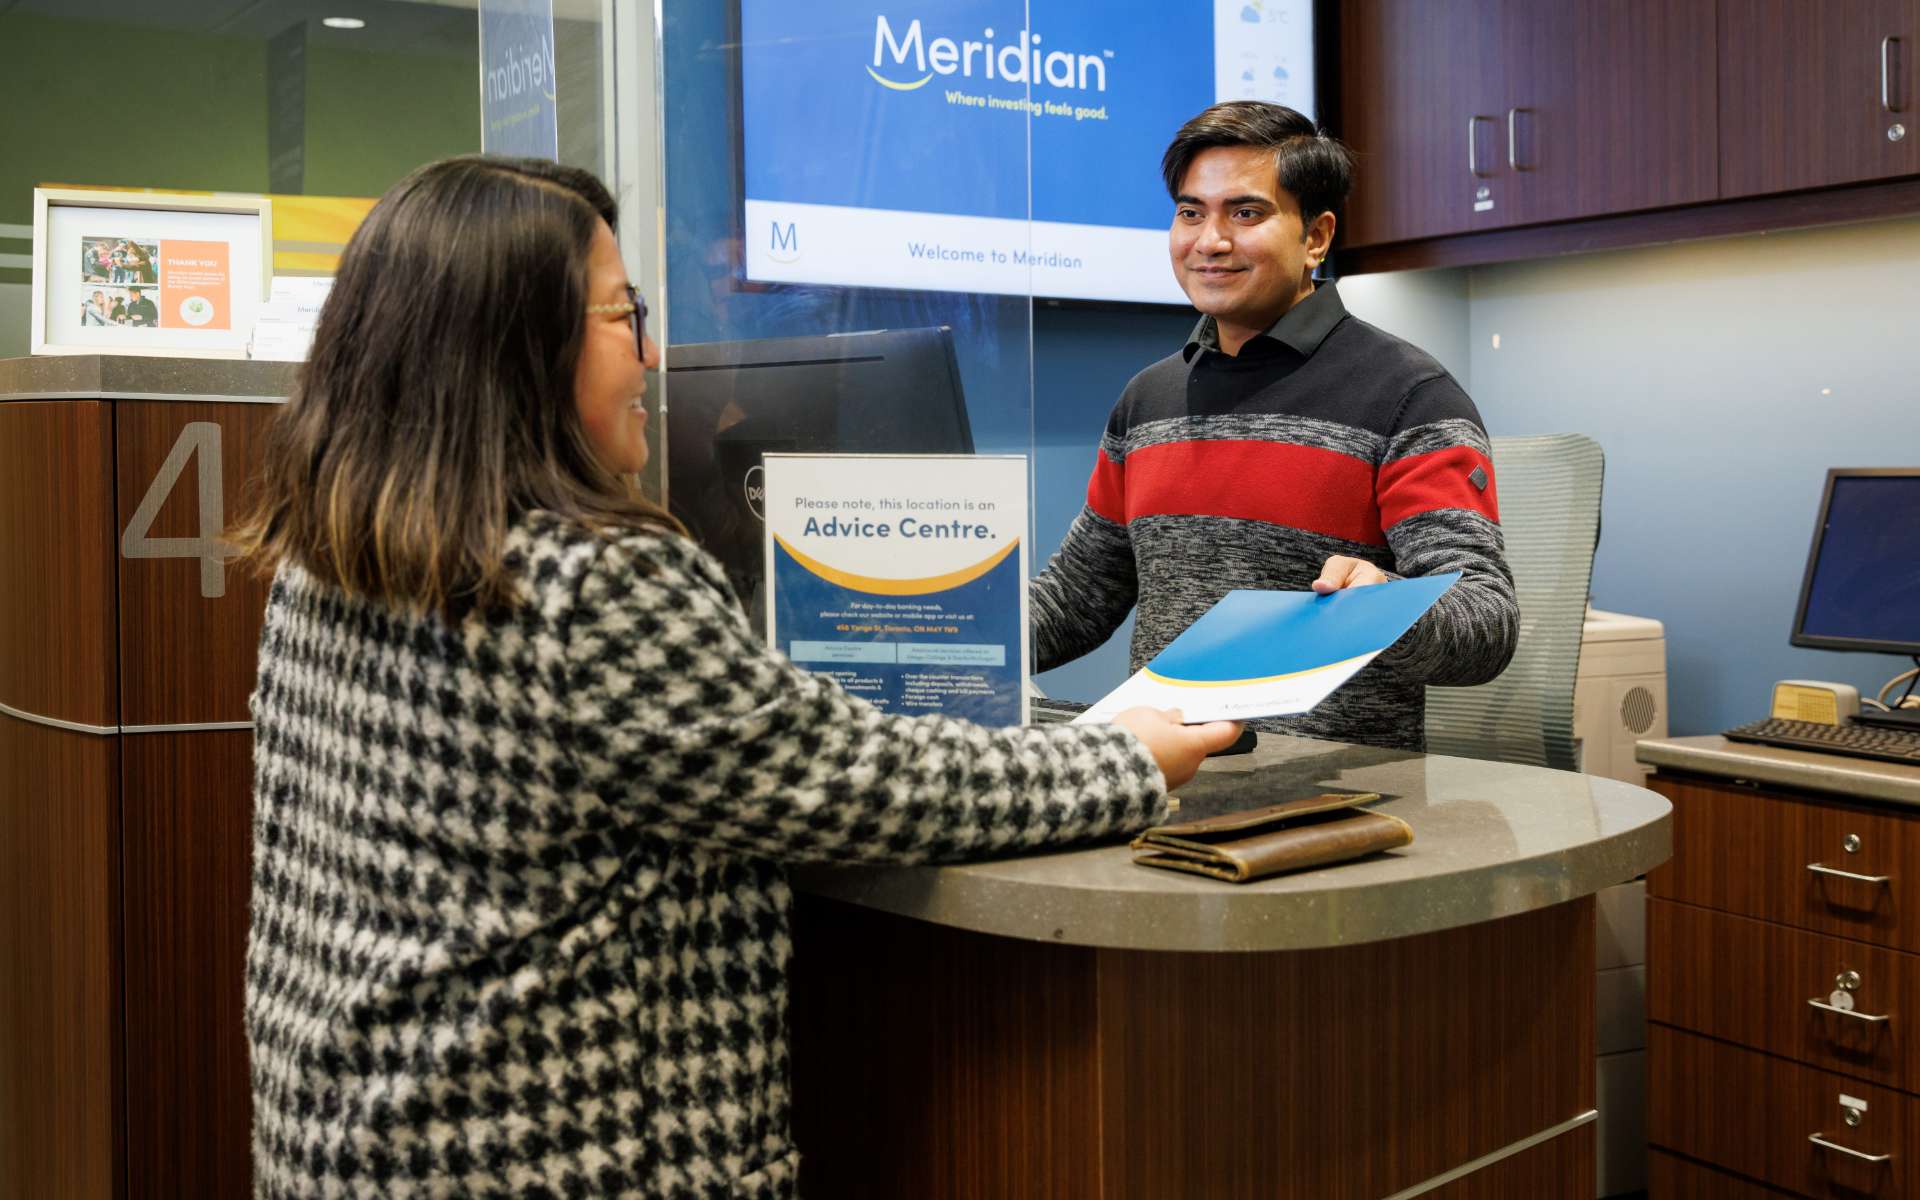 A Meridian employee greets a Member at the front desk in a branch